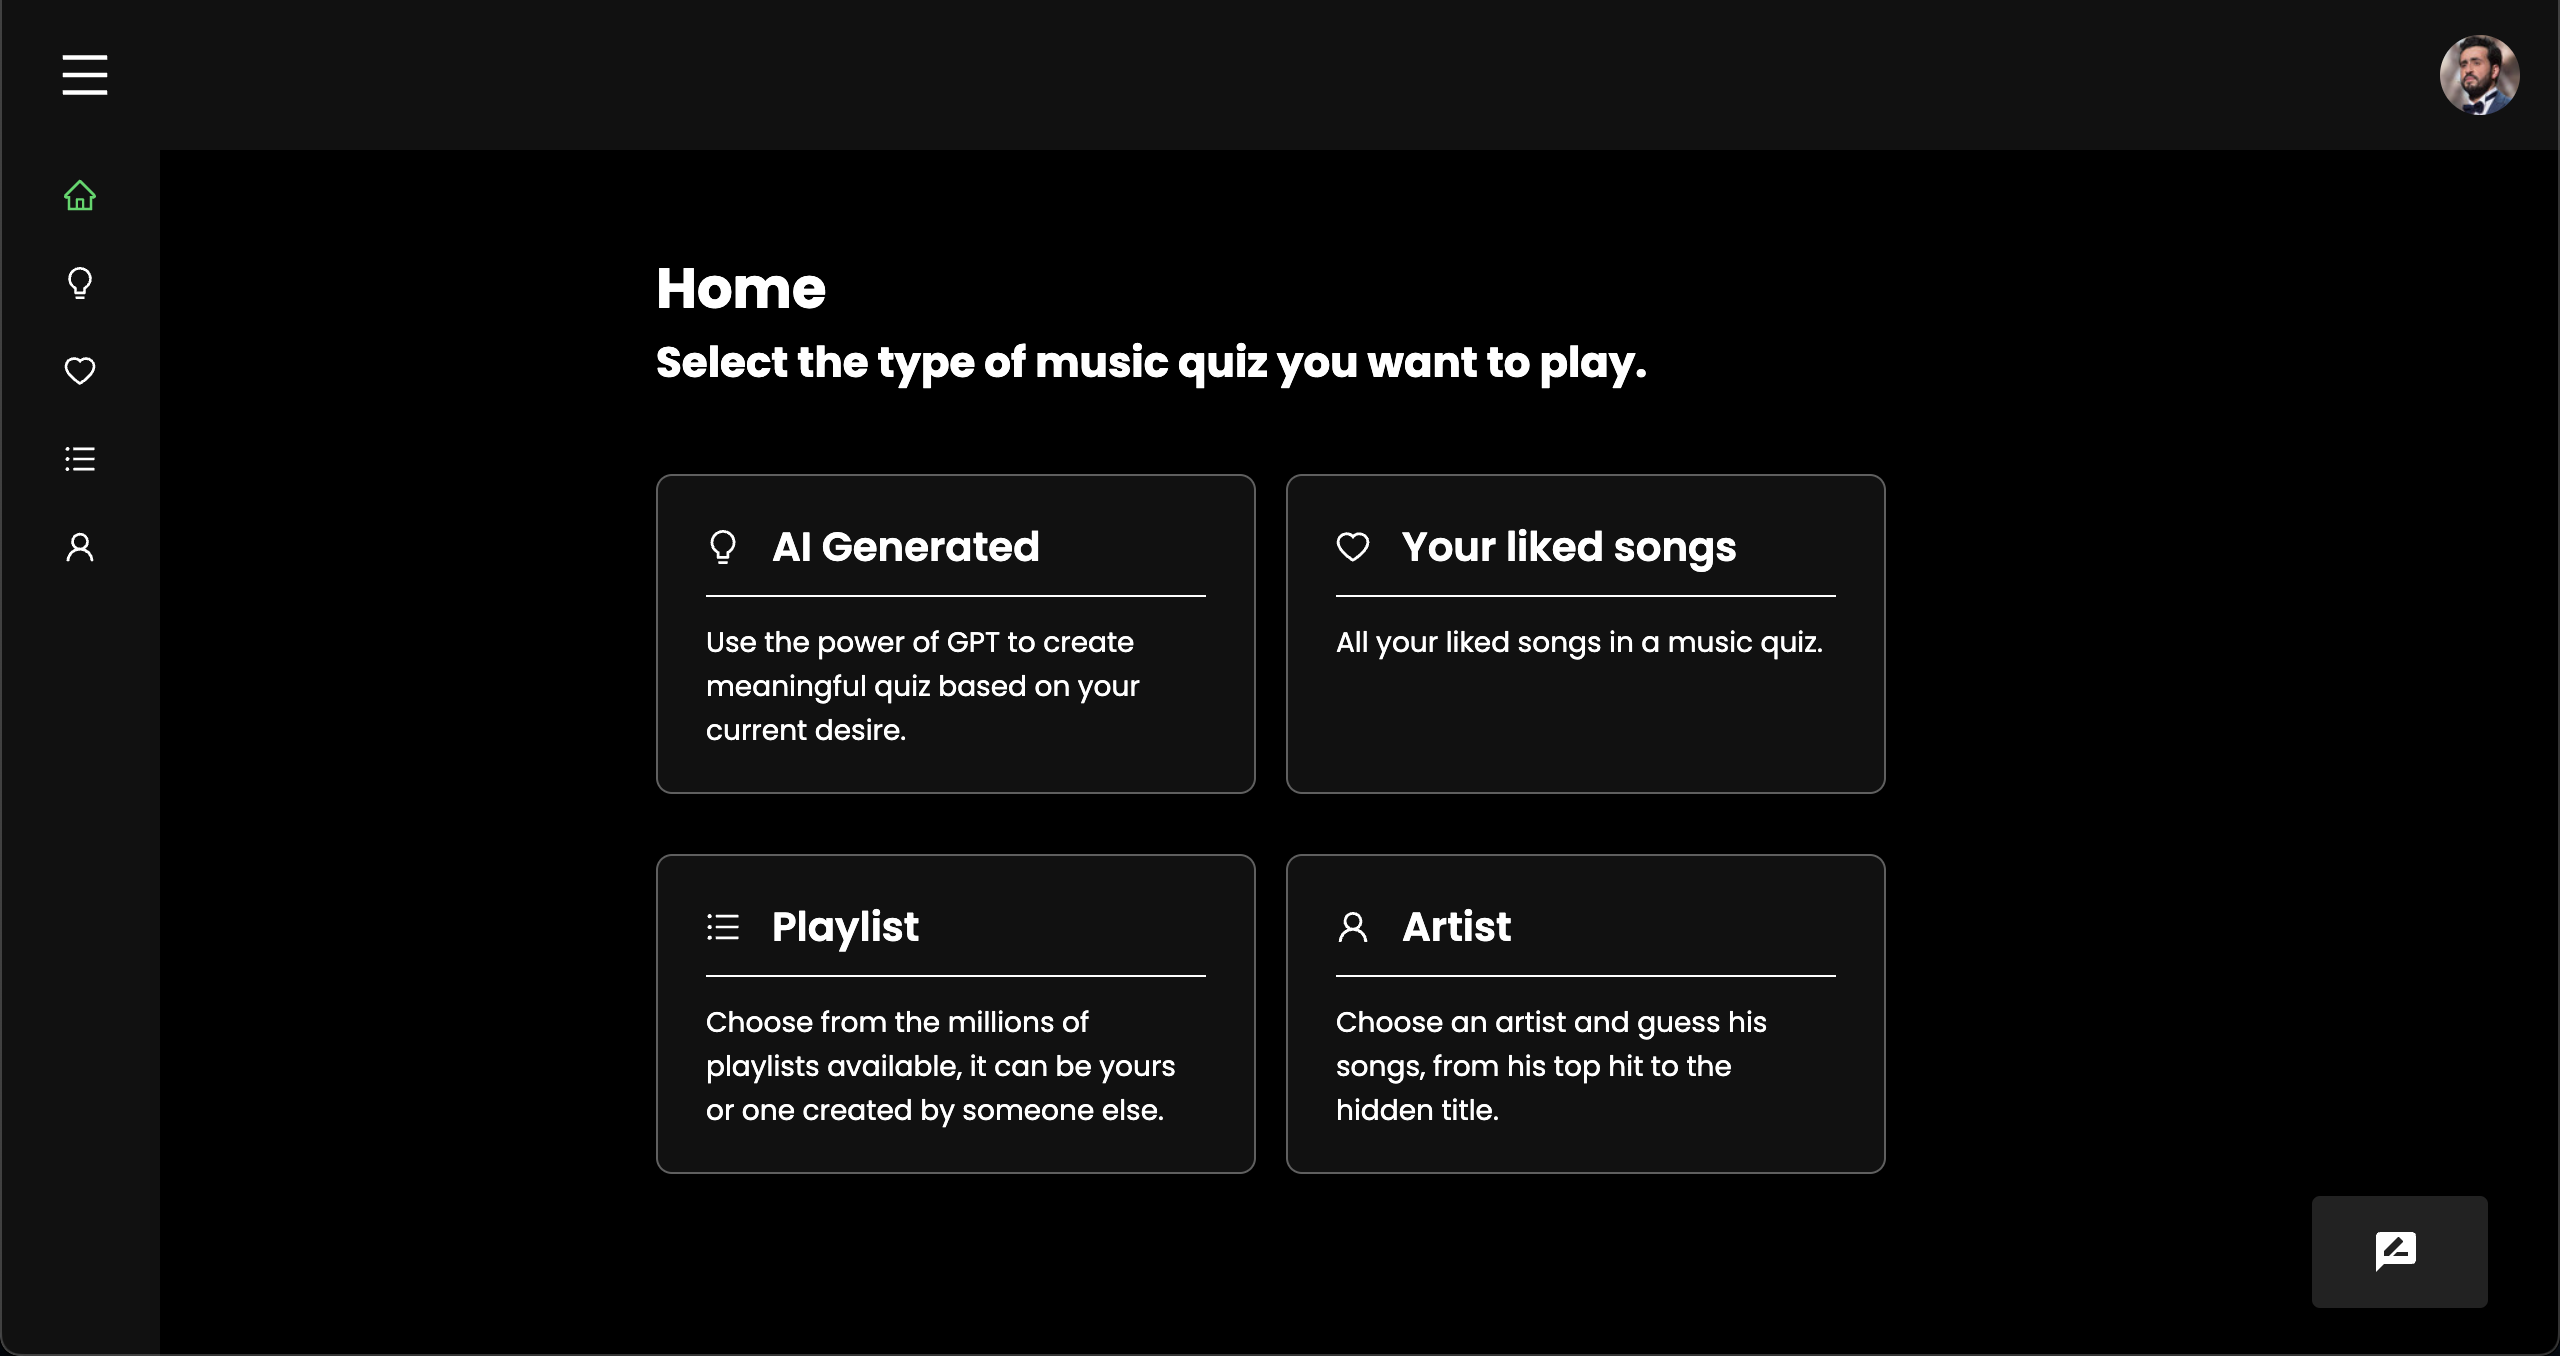 Getting started with Spotiguess